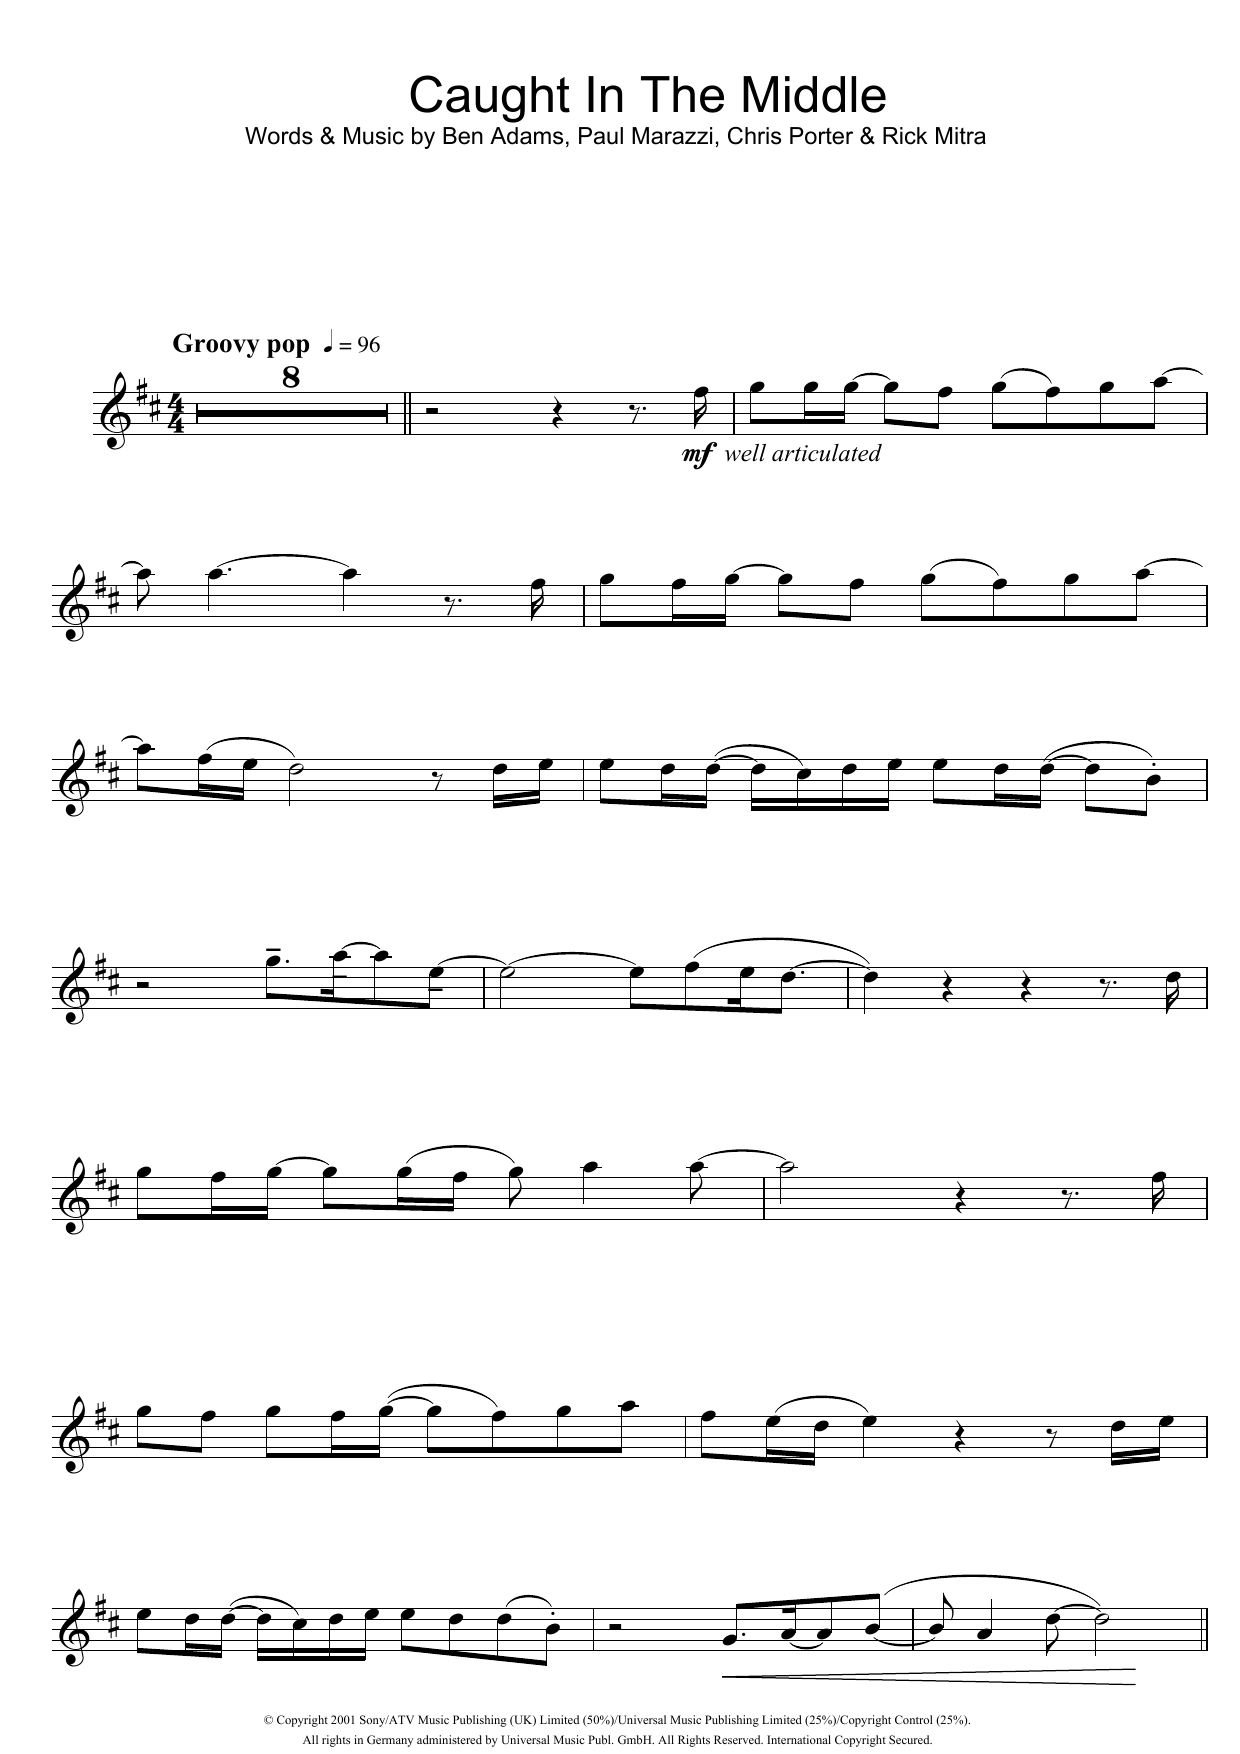 Download A1 Caught In The Middle Sheet Music